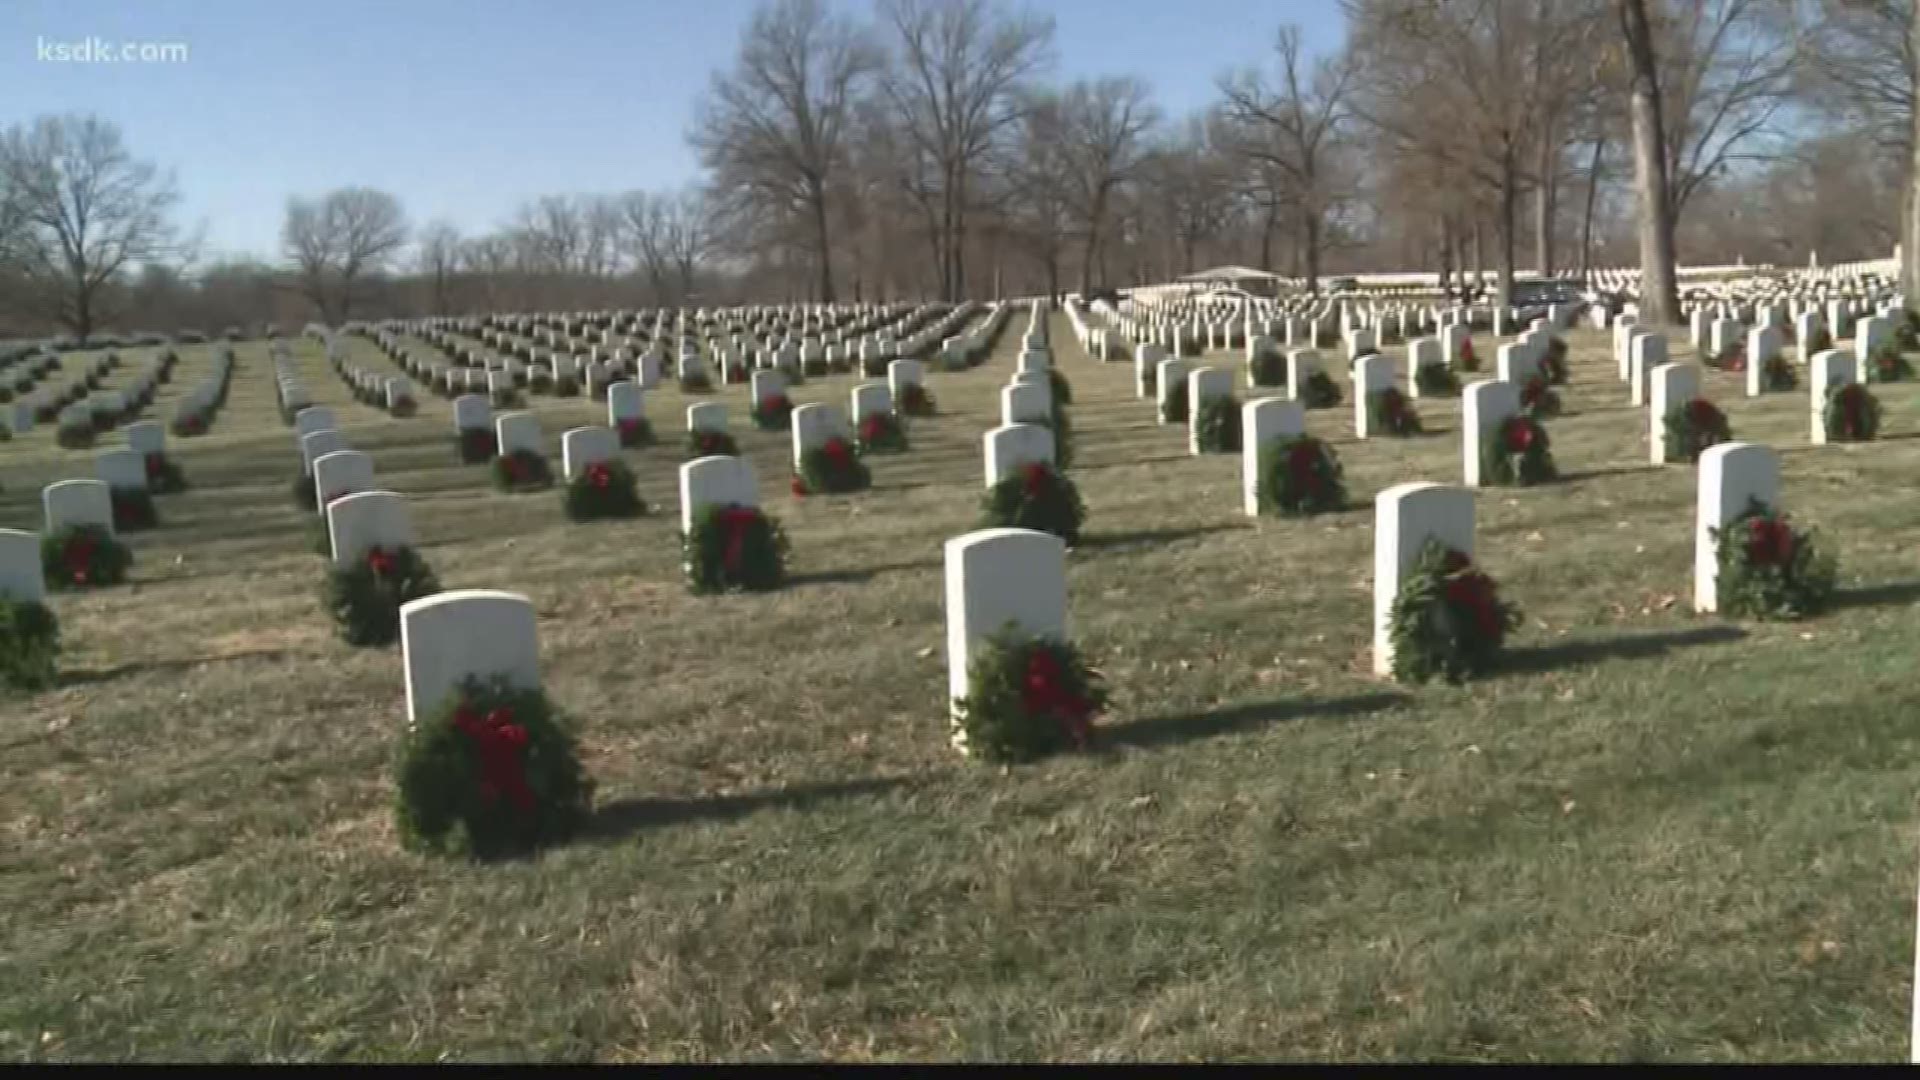 Wreaths Across America is raising money to place as many wreaths as possible on the graves at Jefferson Barracks.